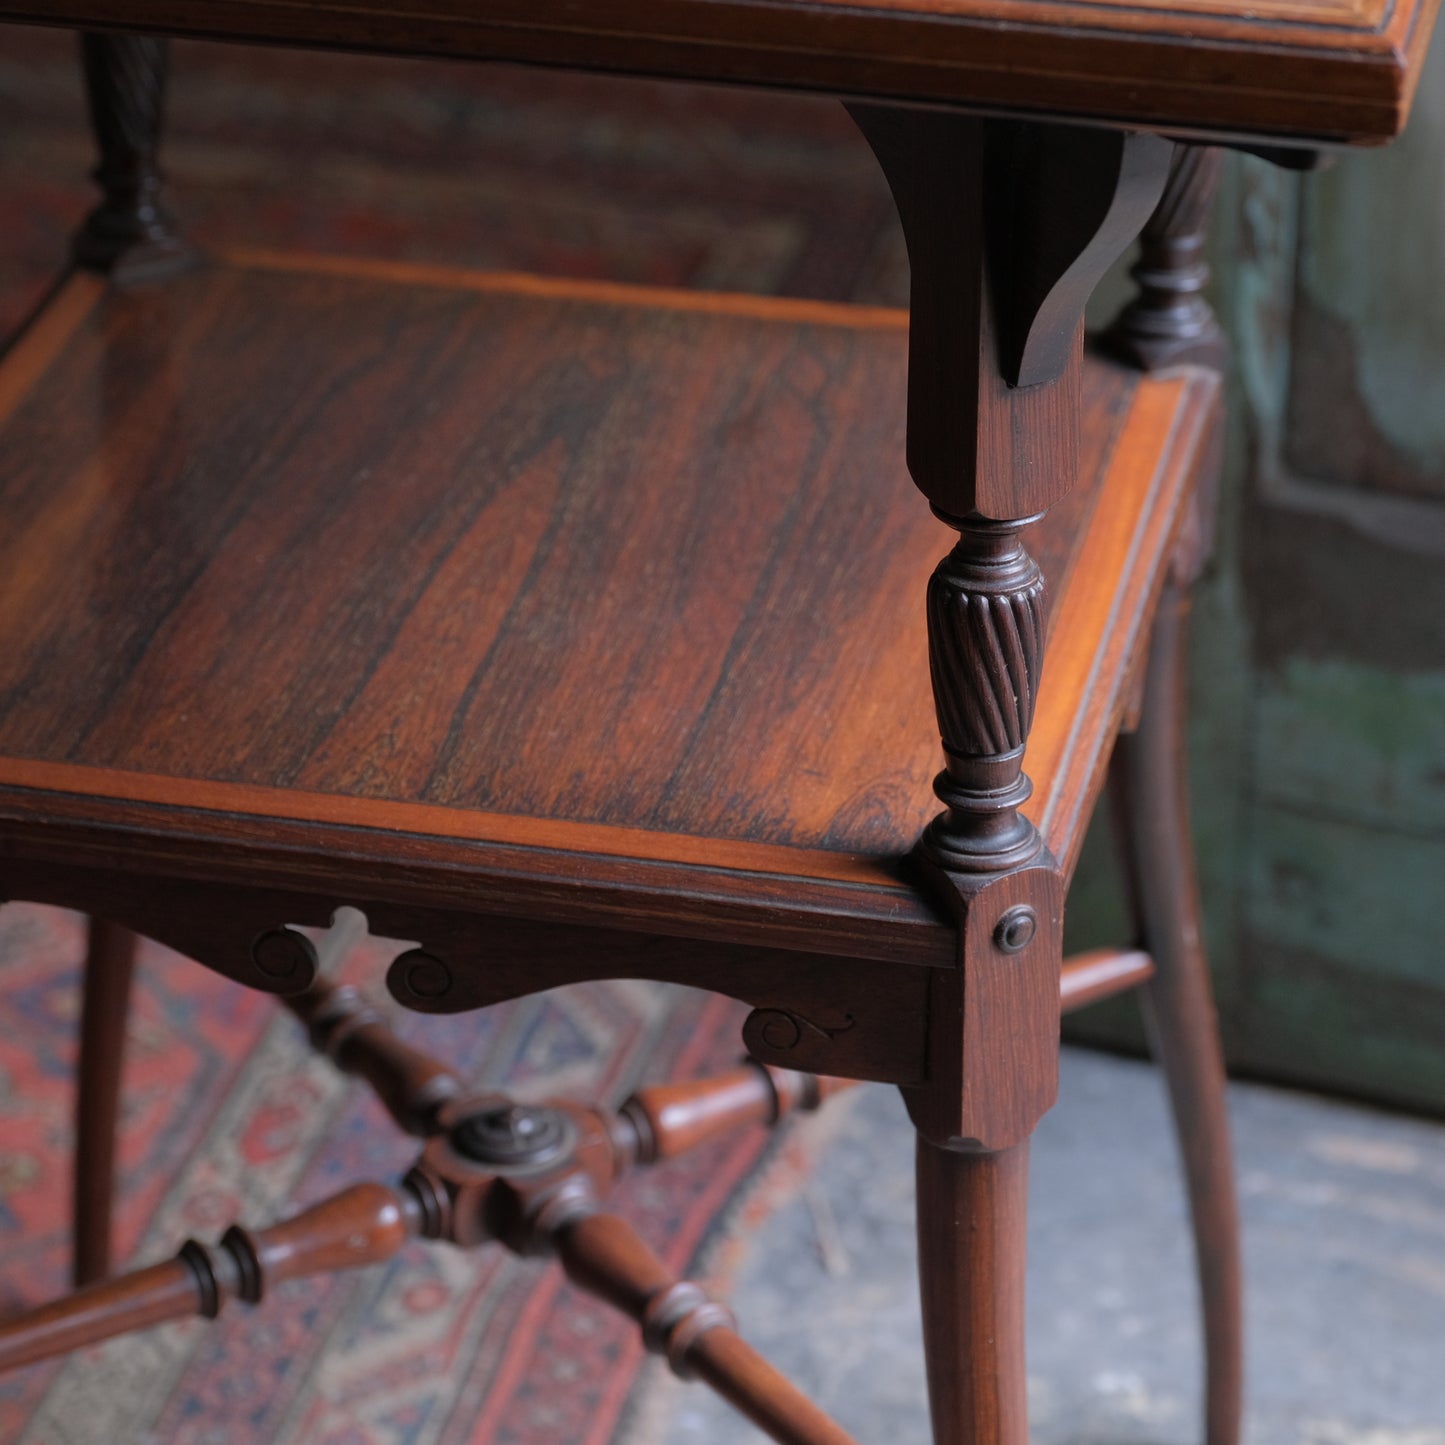 Mahogany side lamp table - embroidery under glass